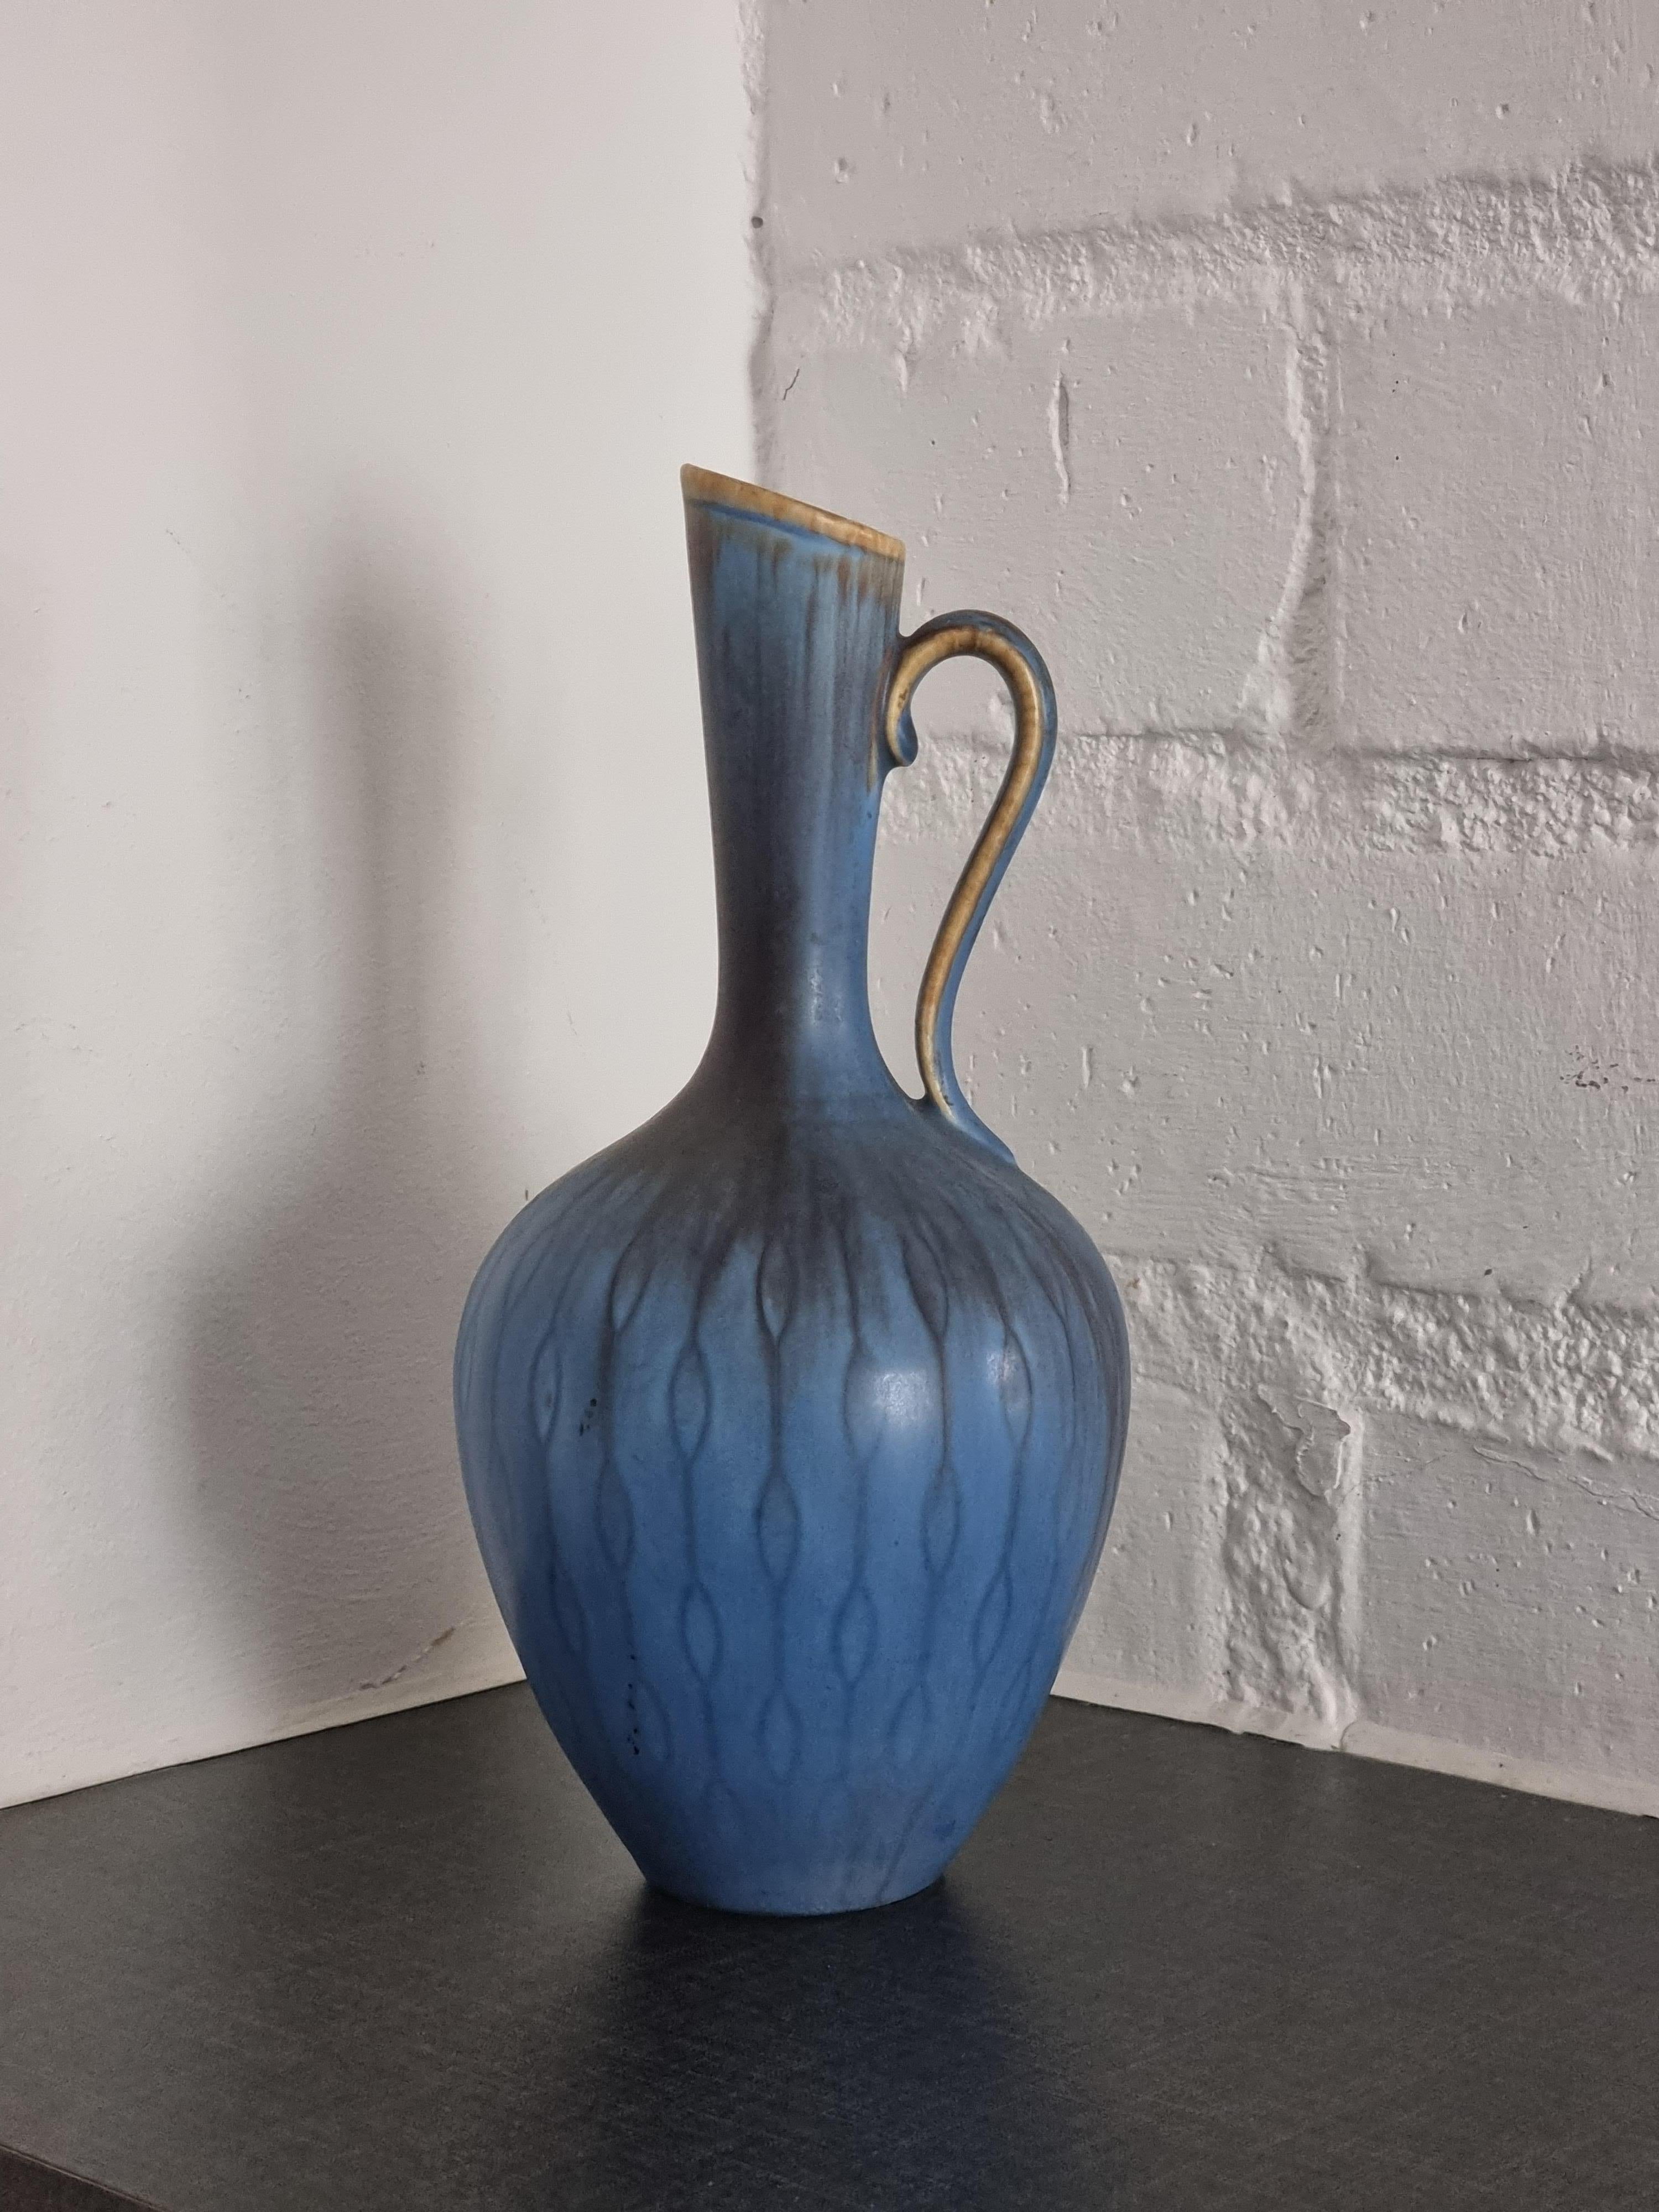 Ceramic carafe / vase with blue glaze and rare pattern by Gunnar Nylund for Rörstrand Sweden. Scandinavian Modern, mid-1900s. 

Signed. In good condition. Beautiful decorative shape and color, a true masterpiece by artist/designer Gunnar Nylund